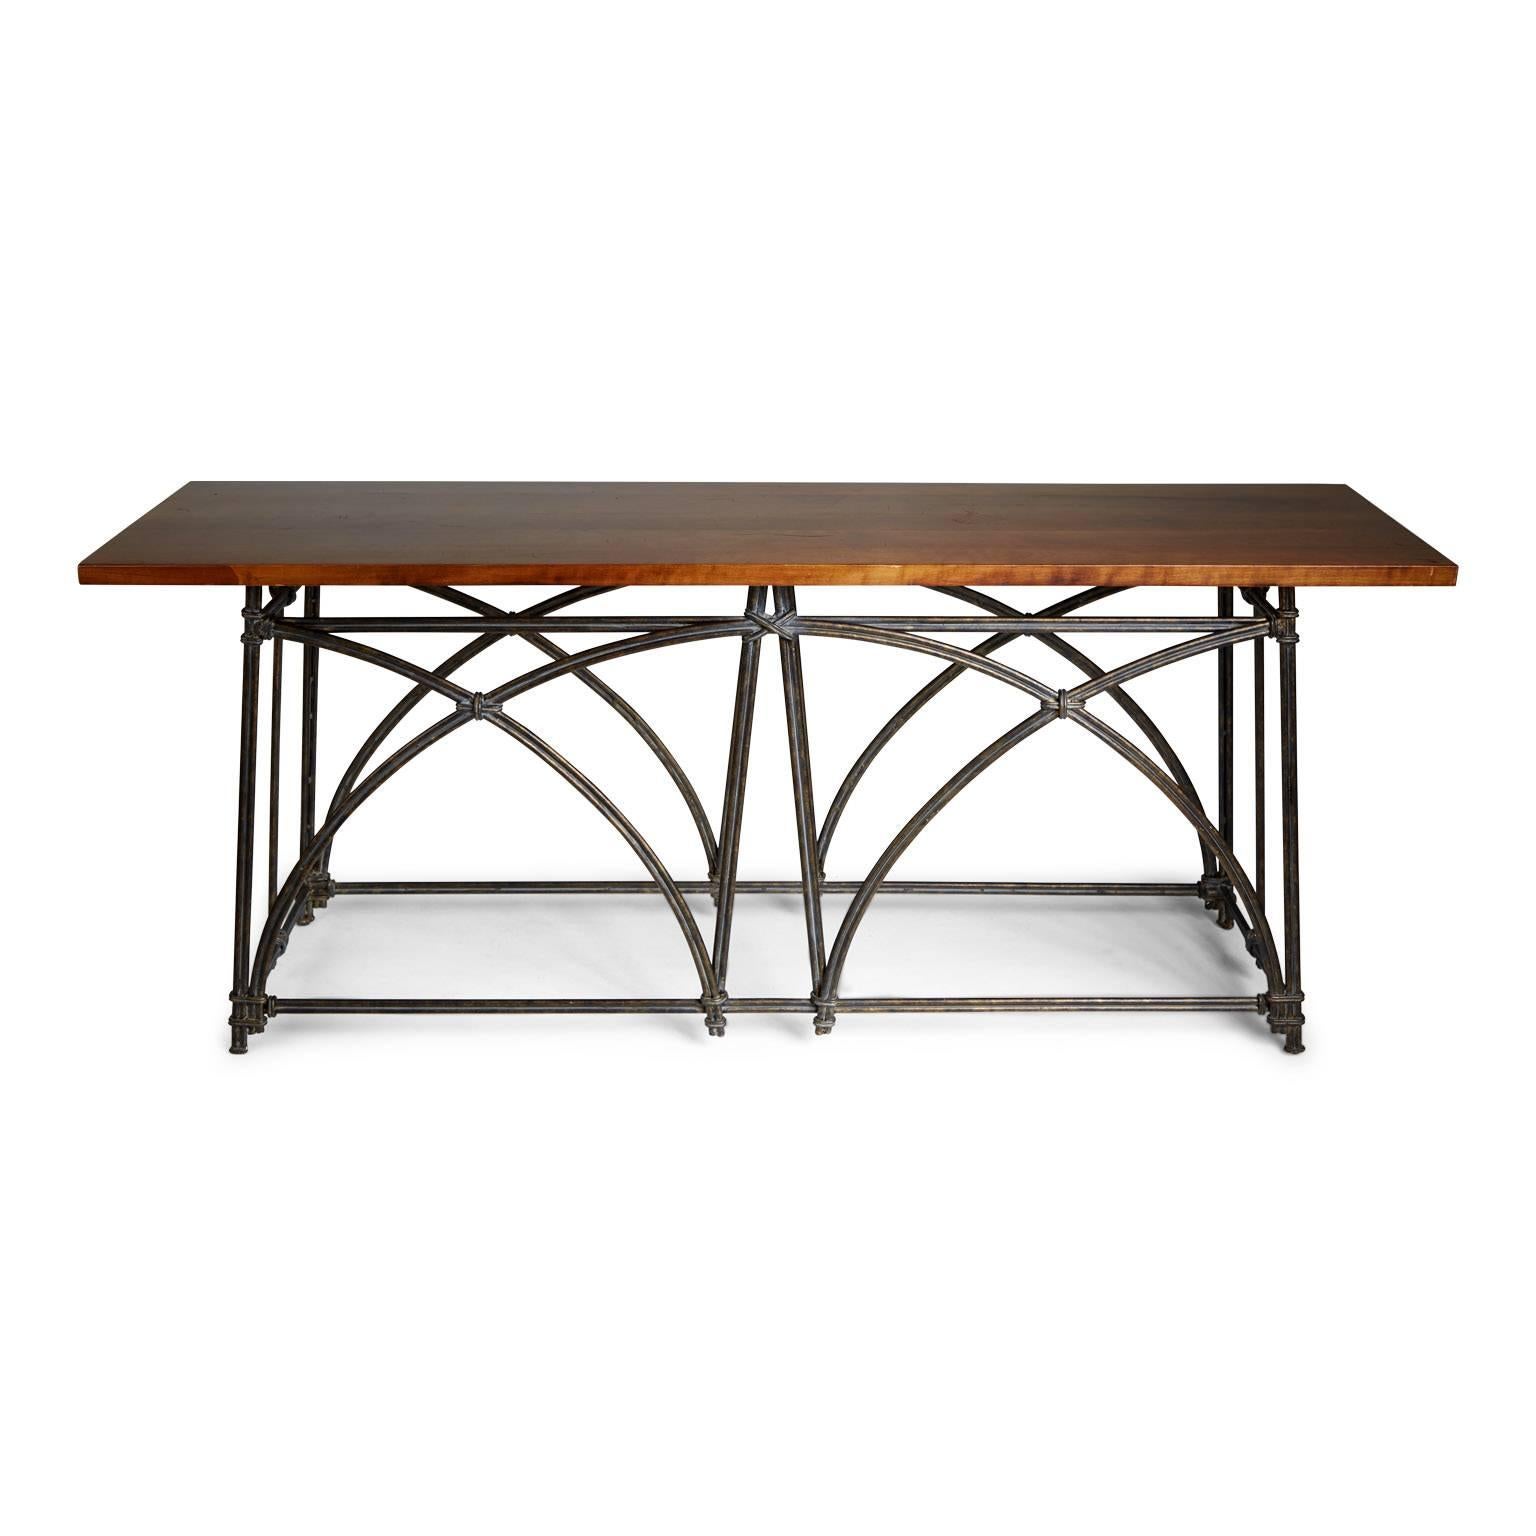 American Colonial Grand Scrolled Iron and Wood Console Table, circa 1970